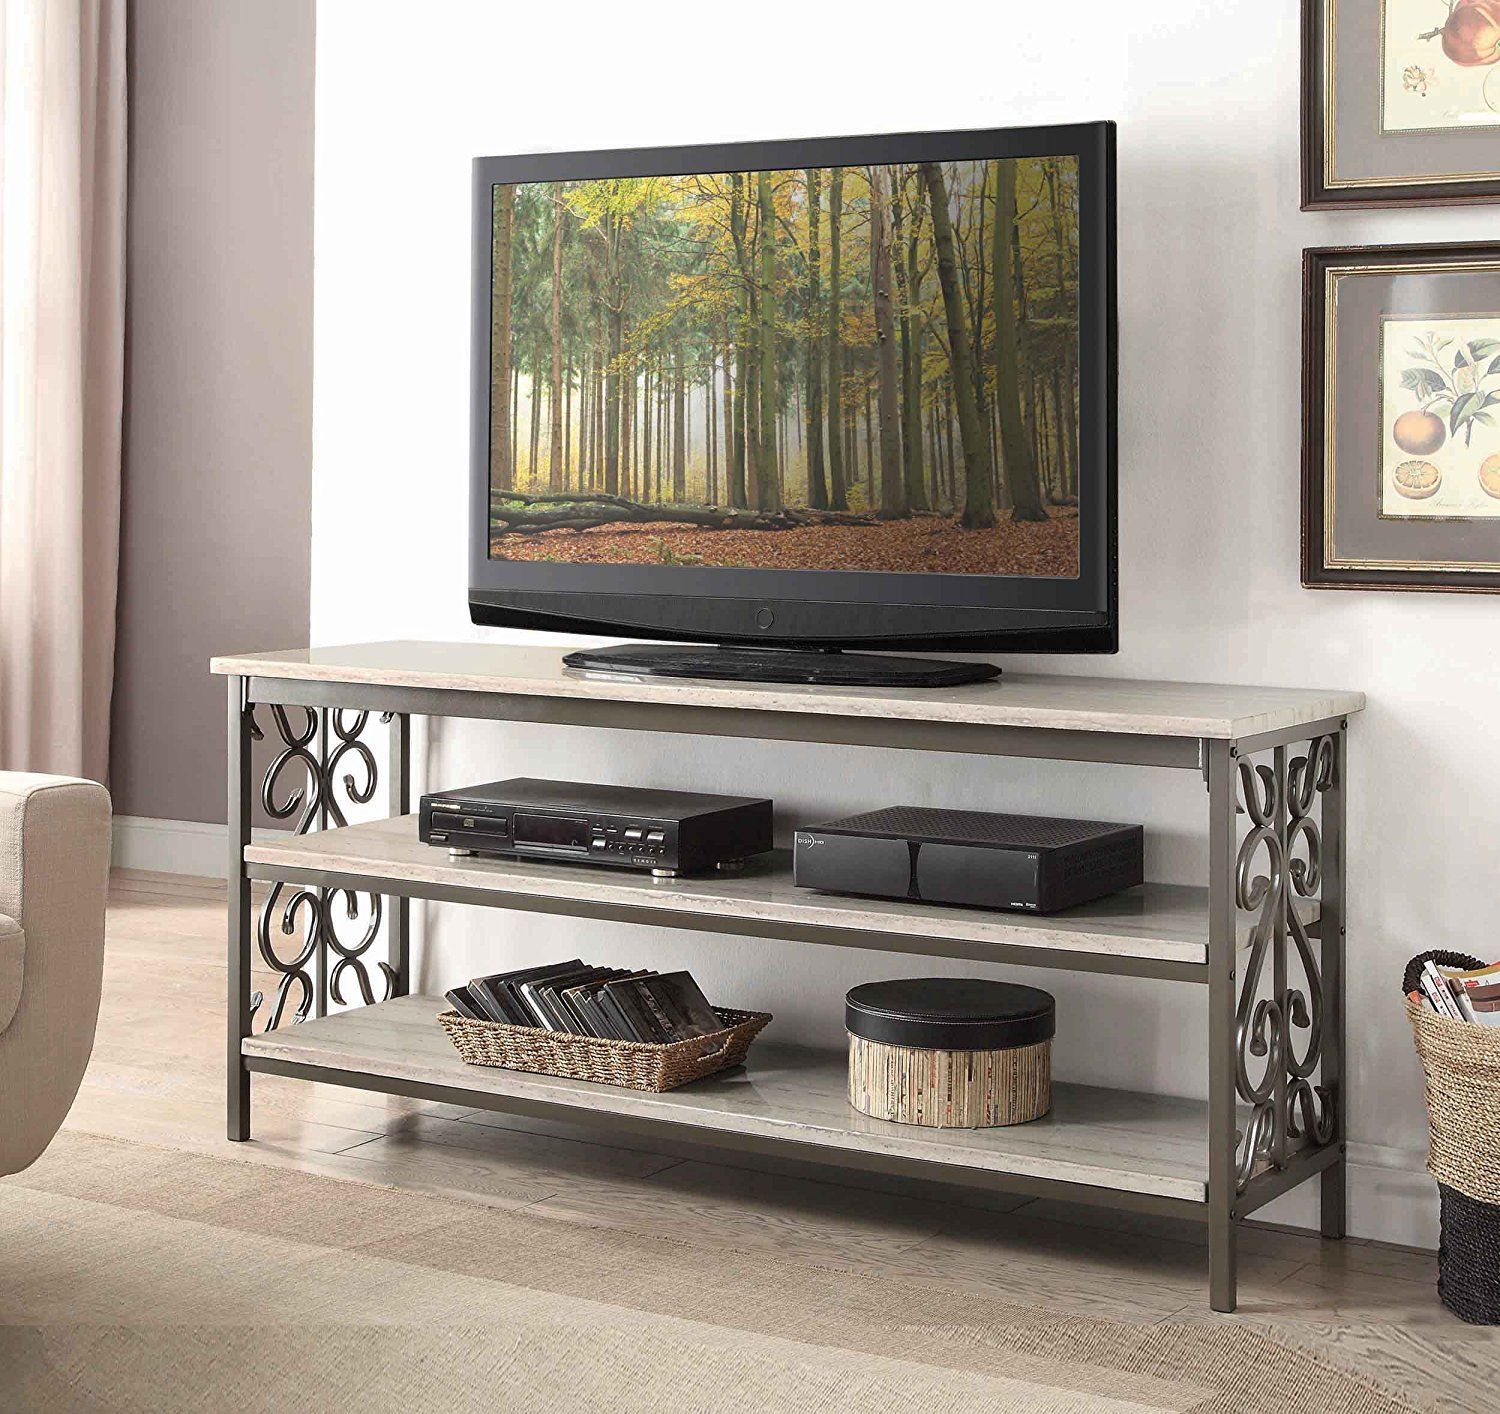 Amazon: Homelegance Fairhope Faux Marble Top Tv Stand With With Regard To Black Marble Tv Stands (View 18 of 20)